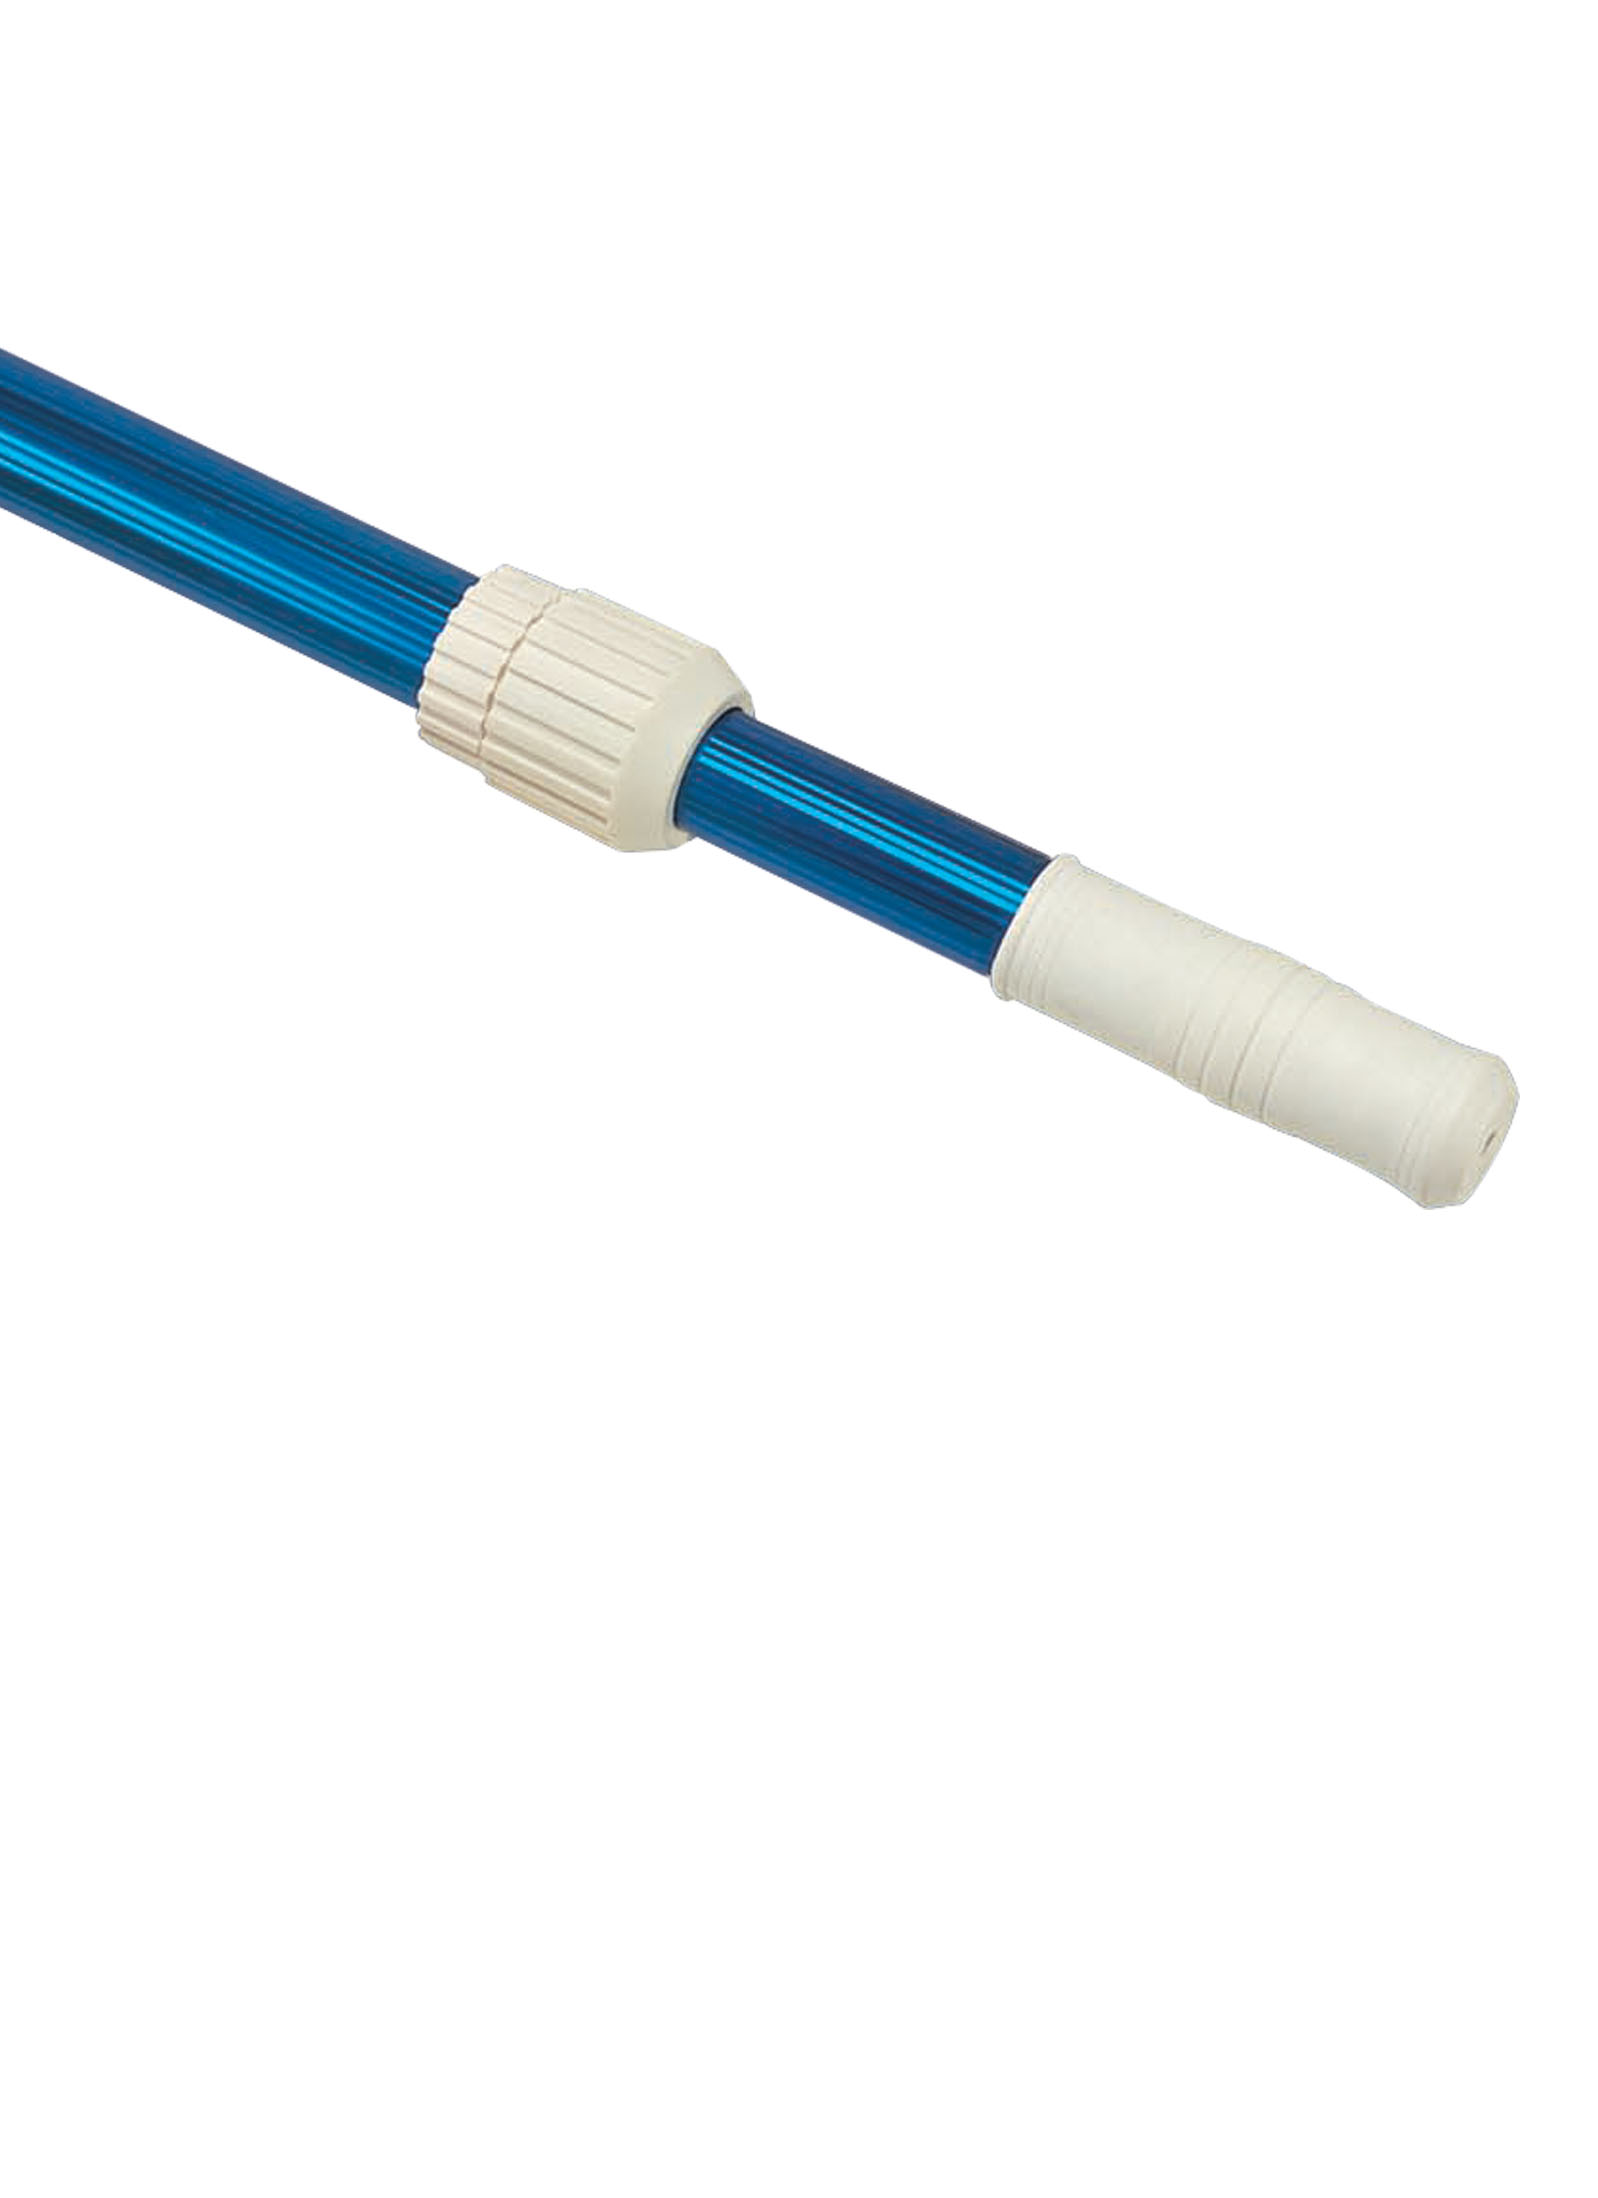 Vacuum Pole 6-12 Ft- Blue Ribbed 100010EE - ELEMENTS